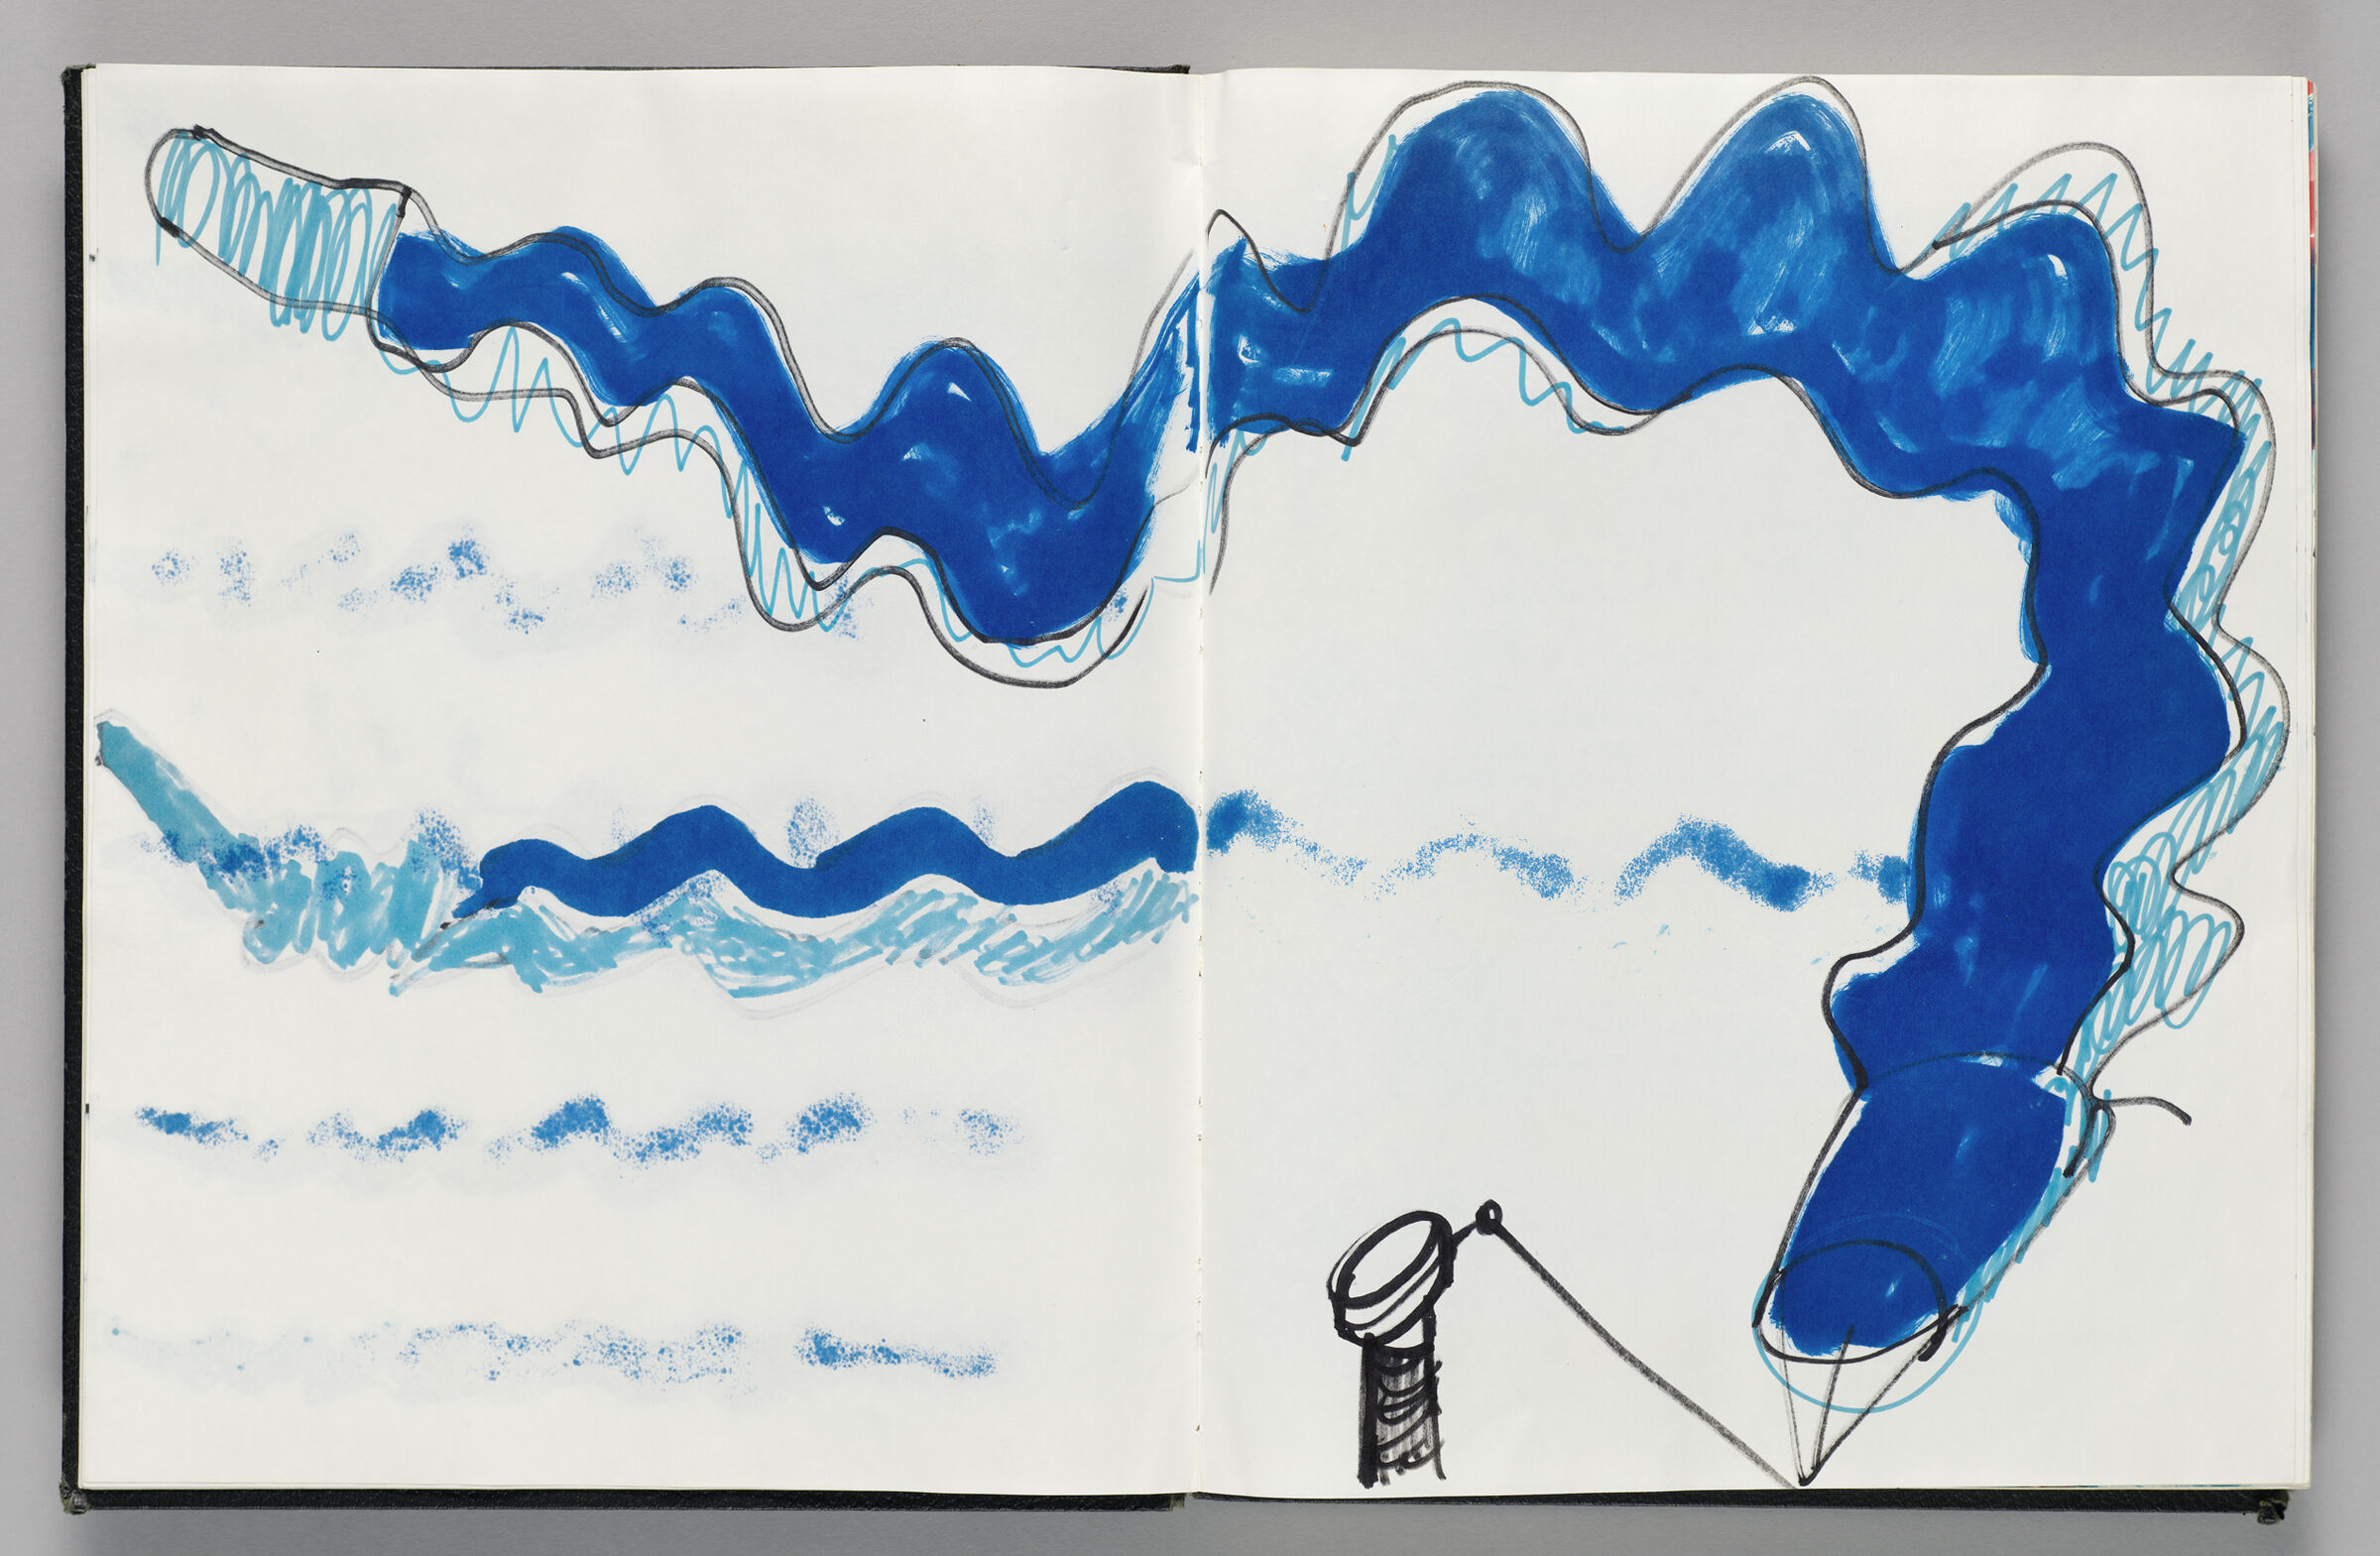 Untitled (Design For Wind Sock Atop Bleed-Through, Two-Page Spread)